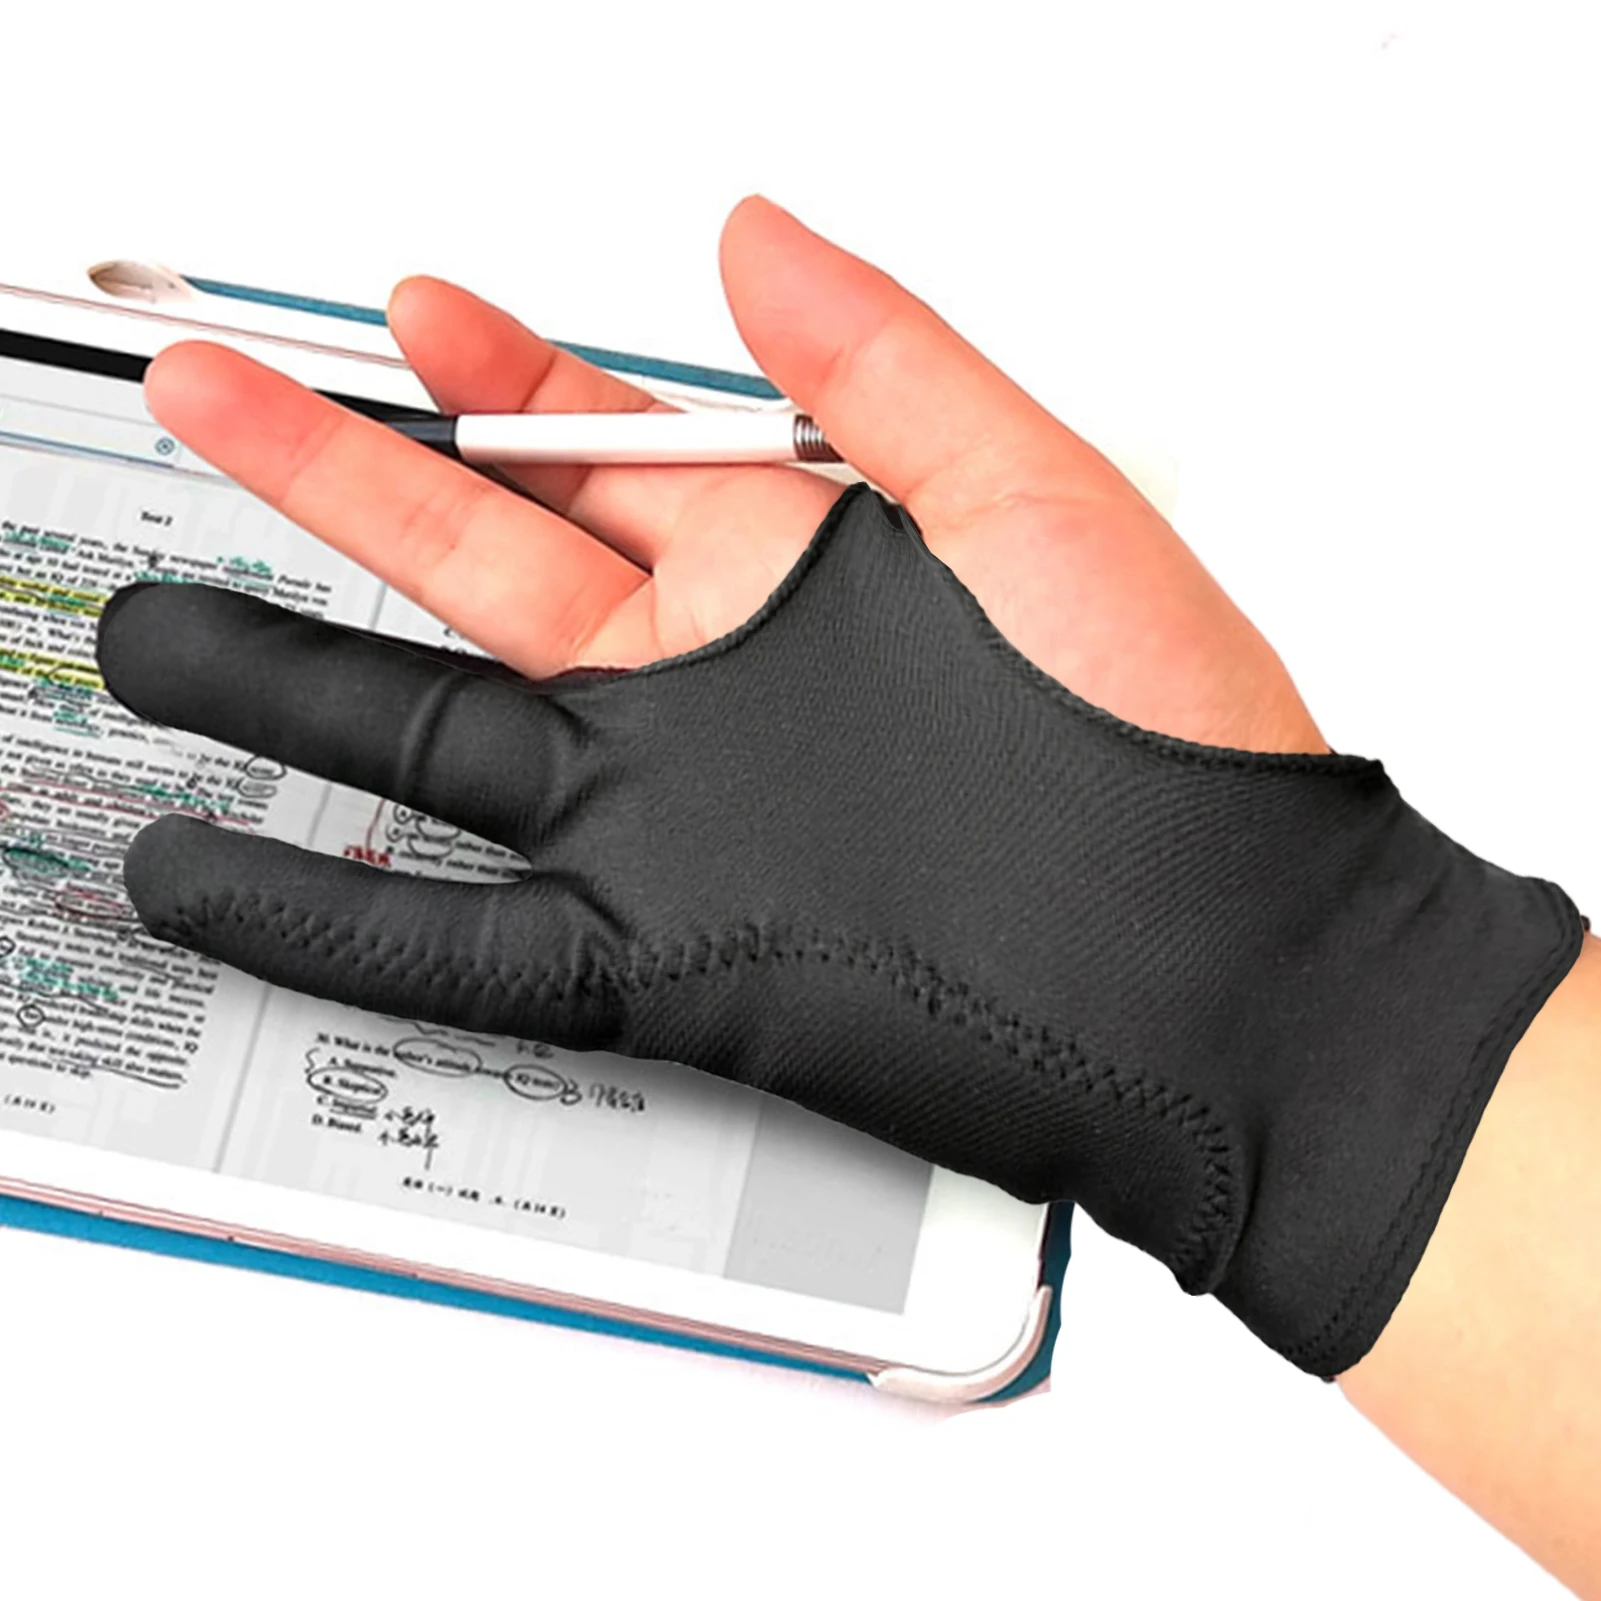 

Anti-touch Glove Artist's Drawing Glove With Two Fingers Artist Gloves With Two Fingers For Tablet Paper Sketching Smudge Guard